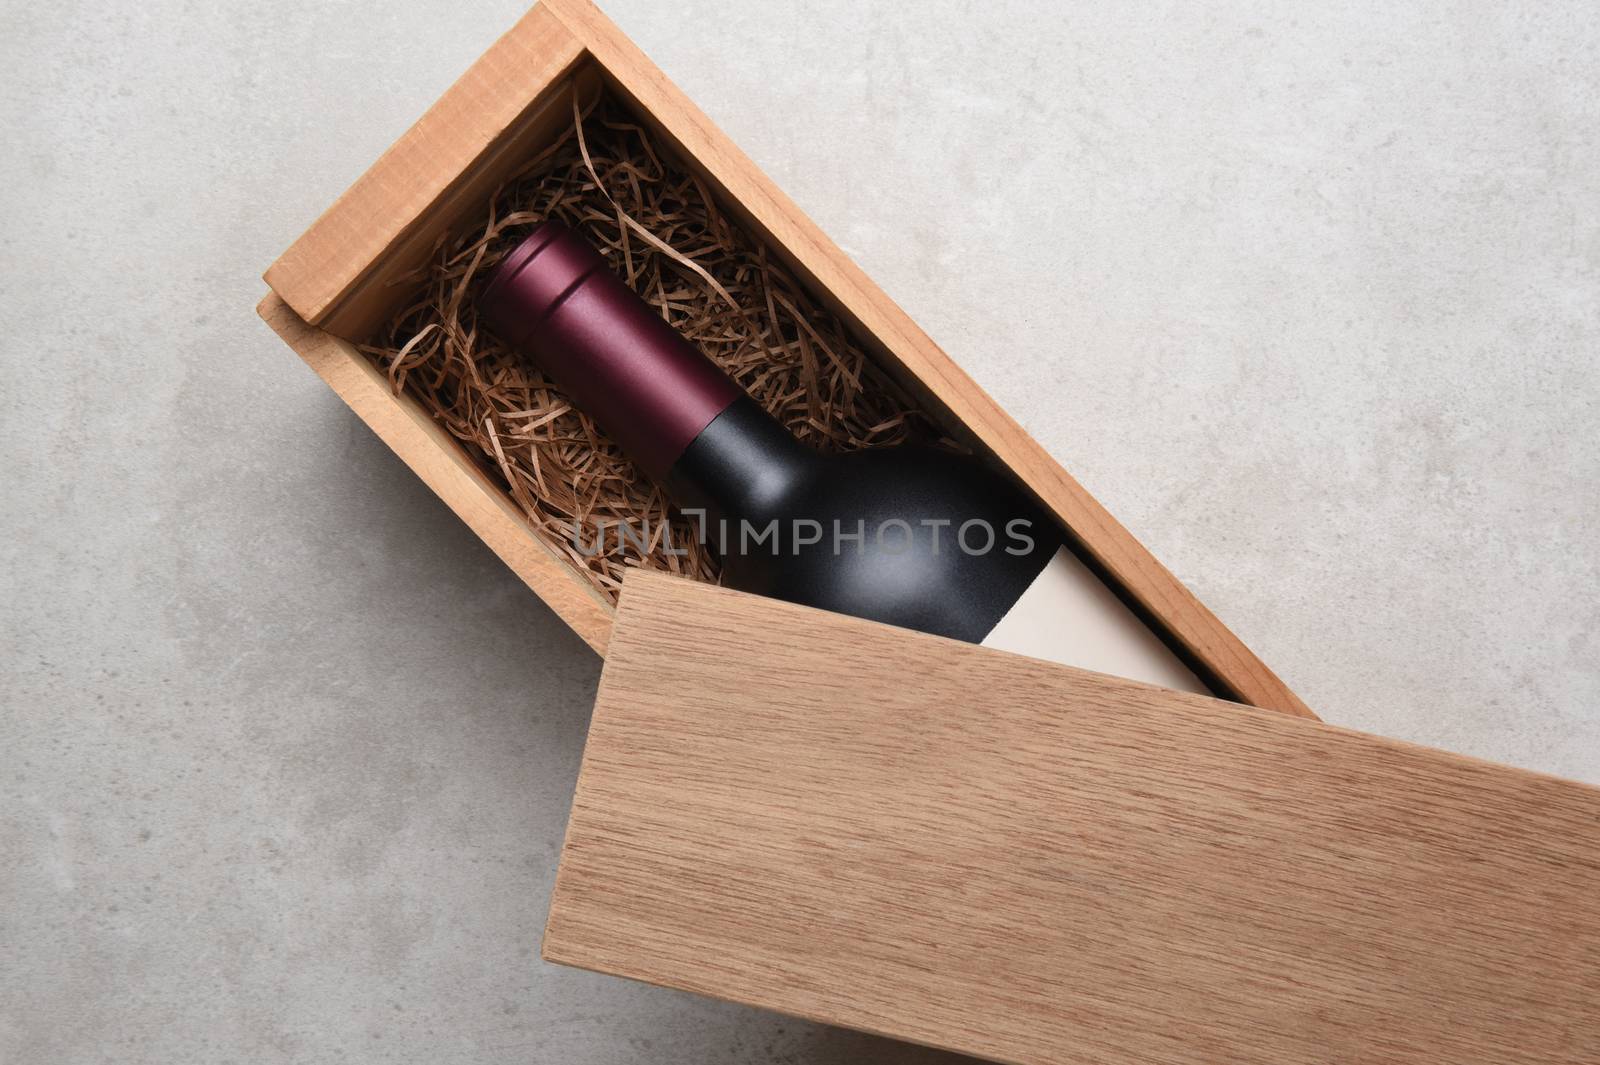 Cabernet Wine Box: A single bottle of red wine in a wood box partially covered by its lid.